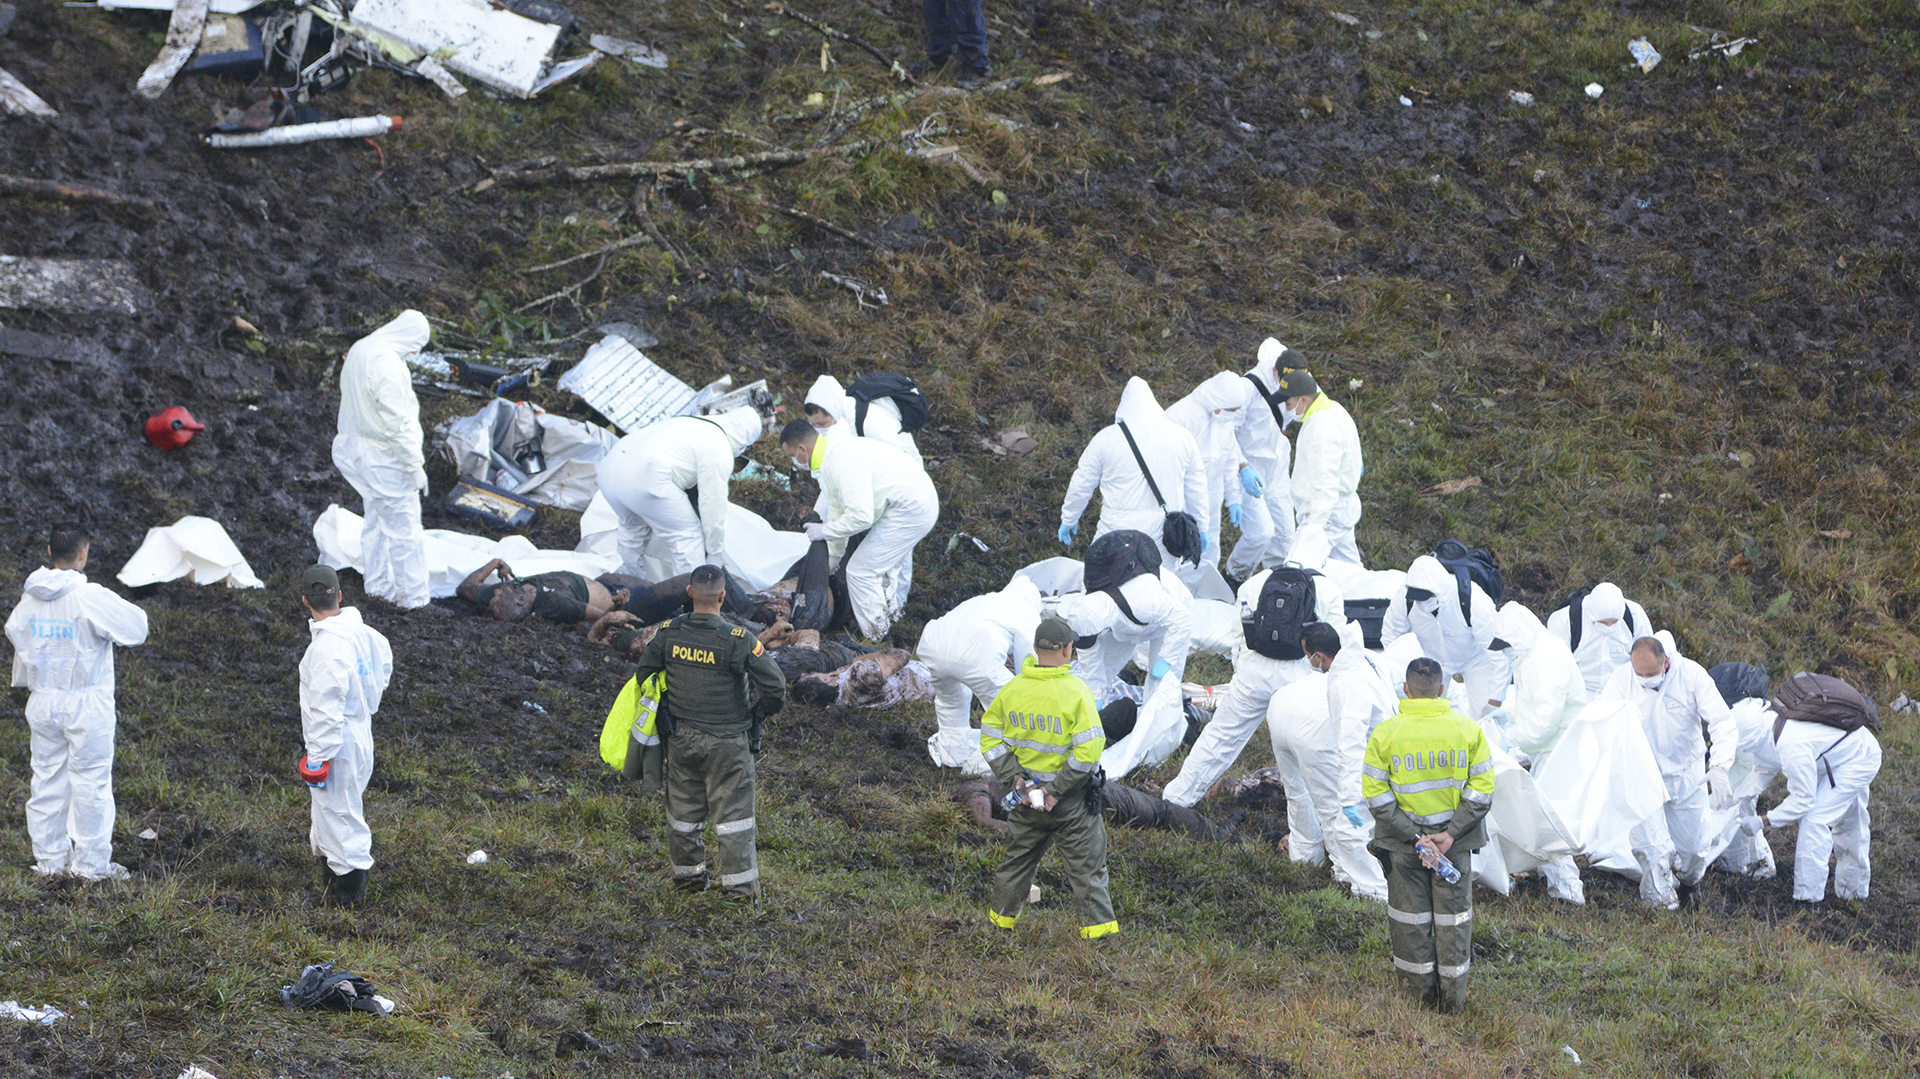 Rescue workers arrange the bodies of victims of an airplane that crashed in La Union, a mountainous area outside Medellin, Colombia, Tuesday , Nov. 29, 2016. The plane was carrying the Brazilian first division soccer club Chapecoense team that was on it's way for a Copa Sudamericana final match against Colombia's Atletico Nacional. (AP Photo/Luis Benavides)